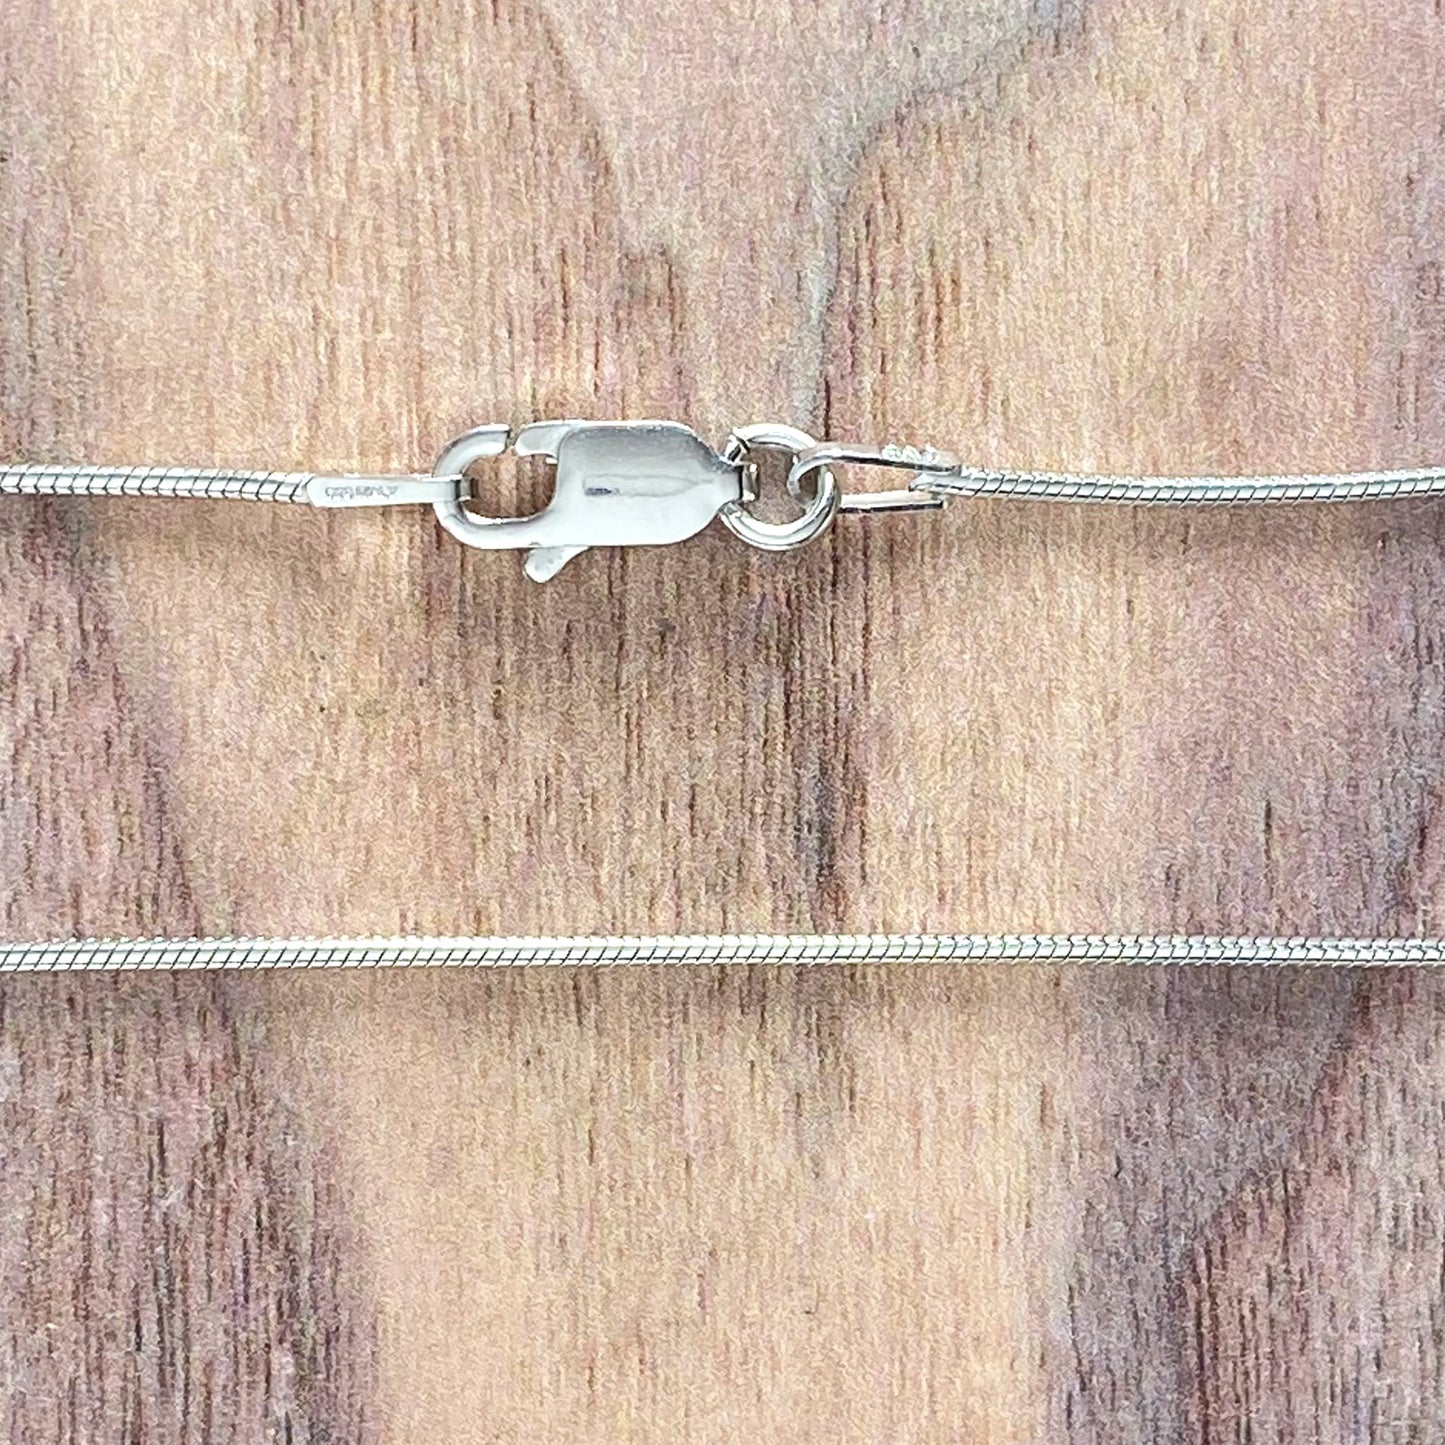 Rhodium Plated Silver Snake Chain Front View - Stone Treasures by the Lake